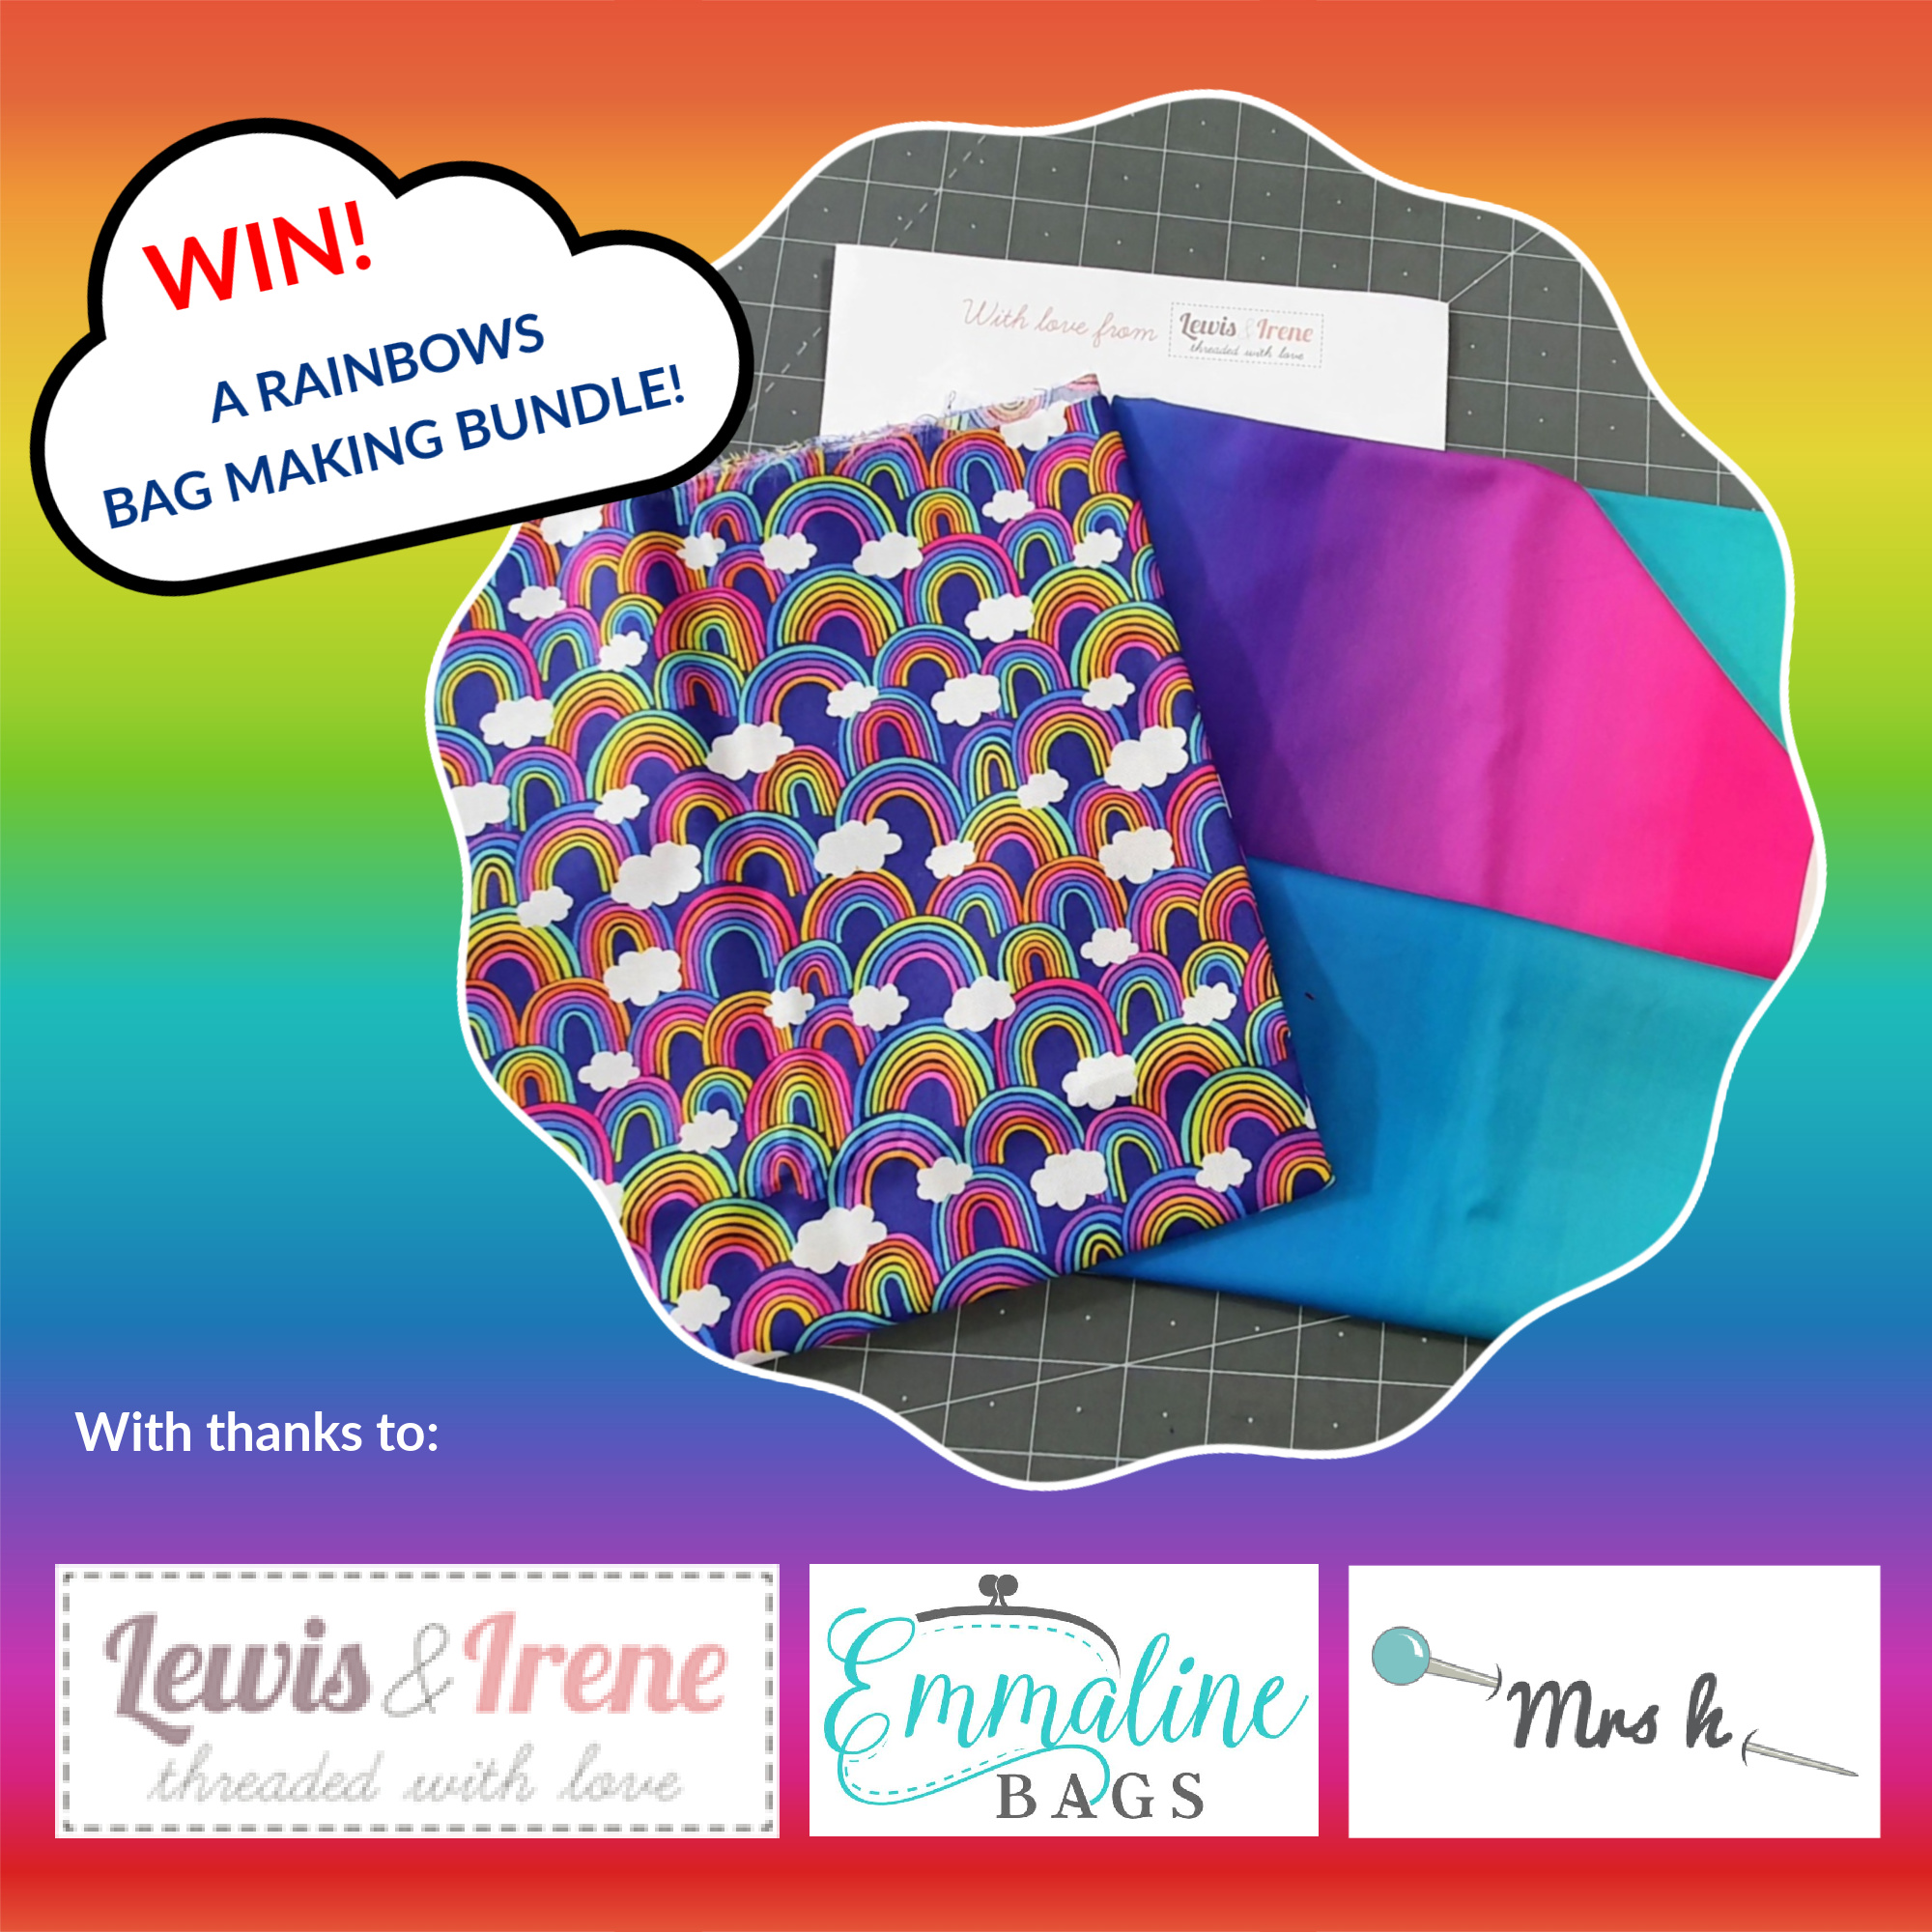 Win Rainbows fabric from Lewis & Irene, patterns from Mrs H, and hardware from Emmaline Bags